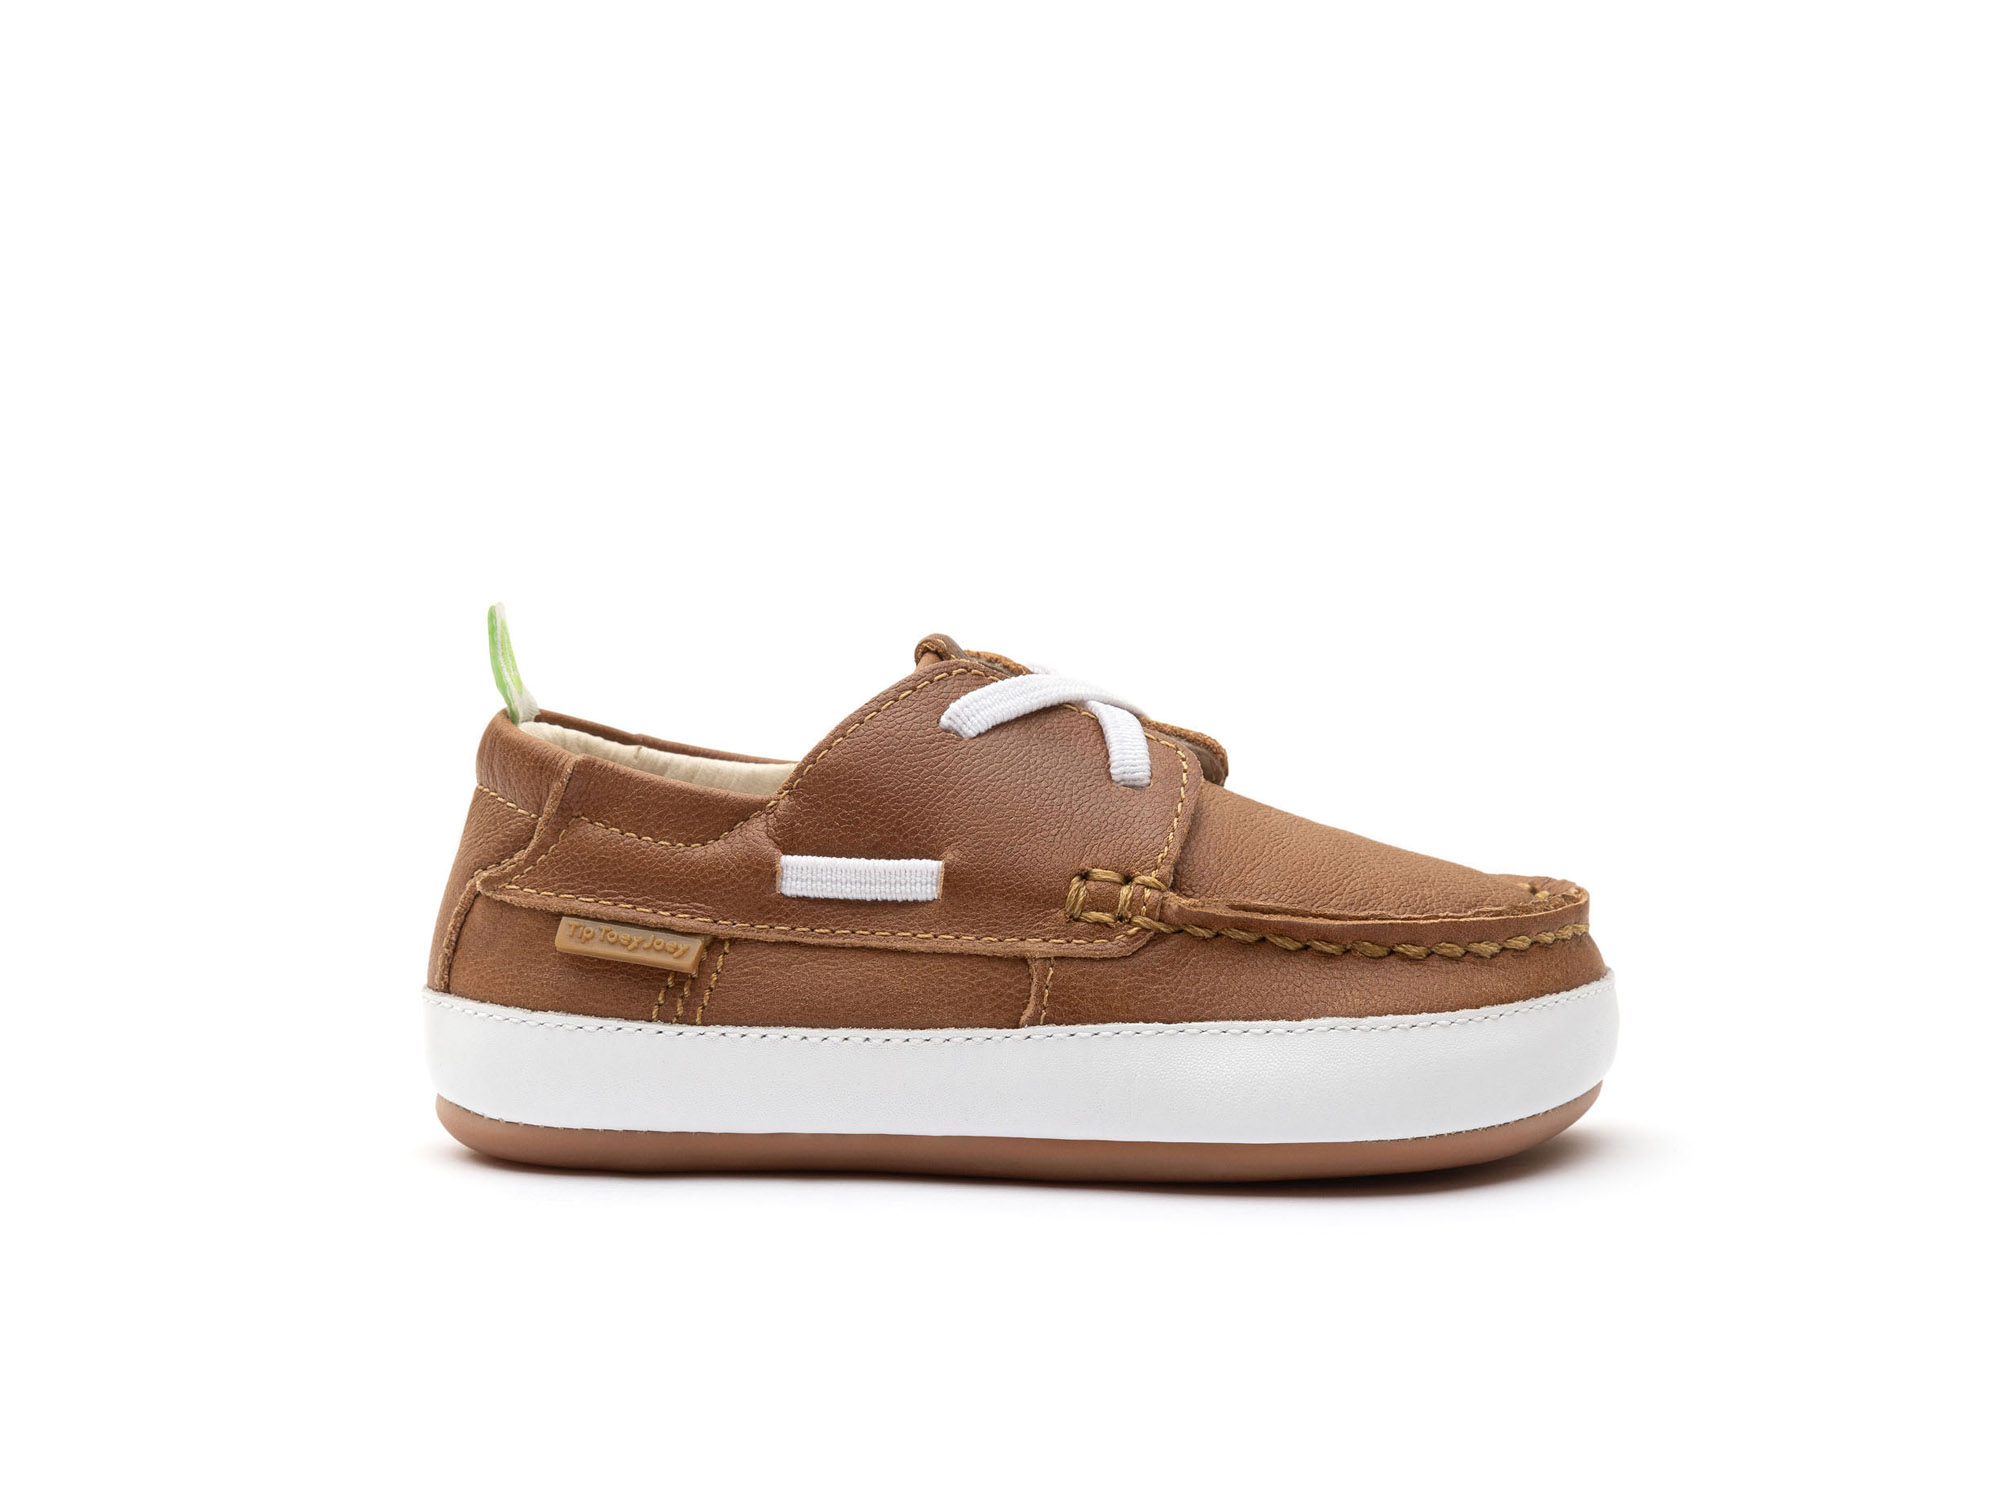 UP & GO Sneakers for Boys Boaty | Tip Toey Joey - Australia - 4